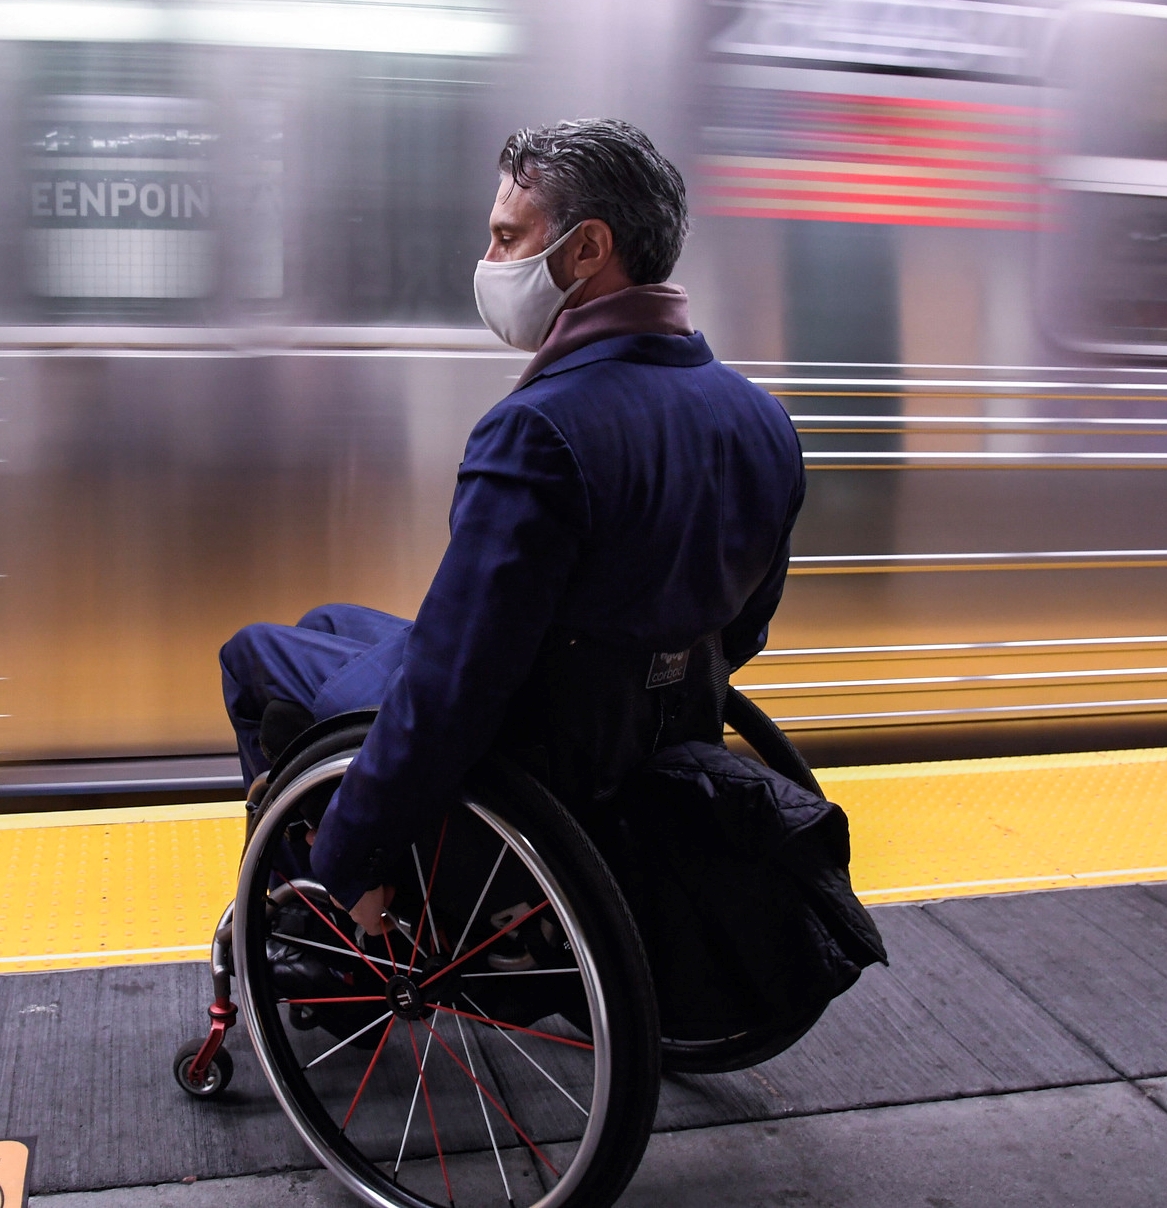 Man in Wheelchair on Subway Platform in front of moving train